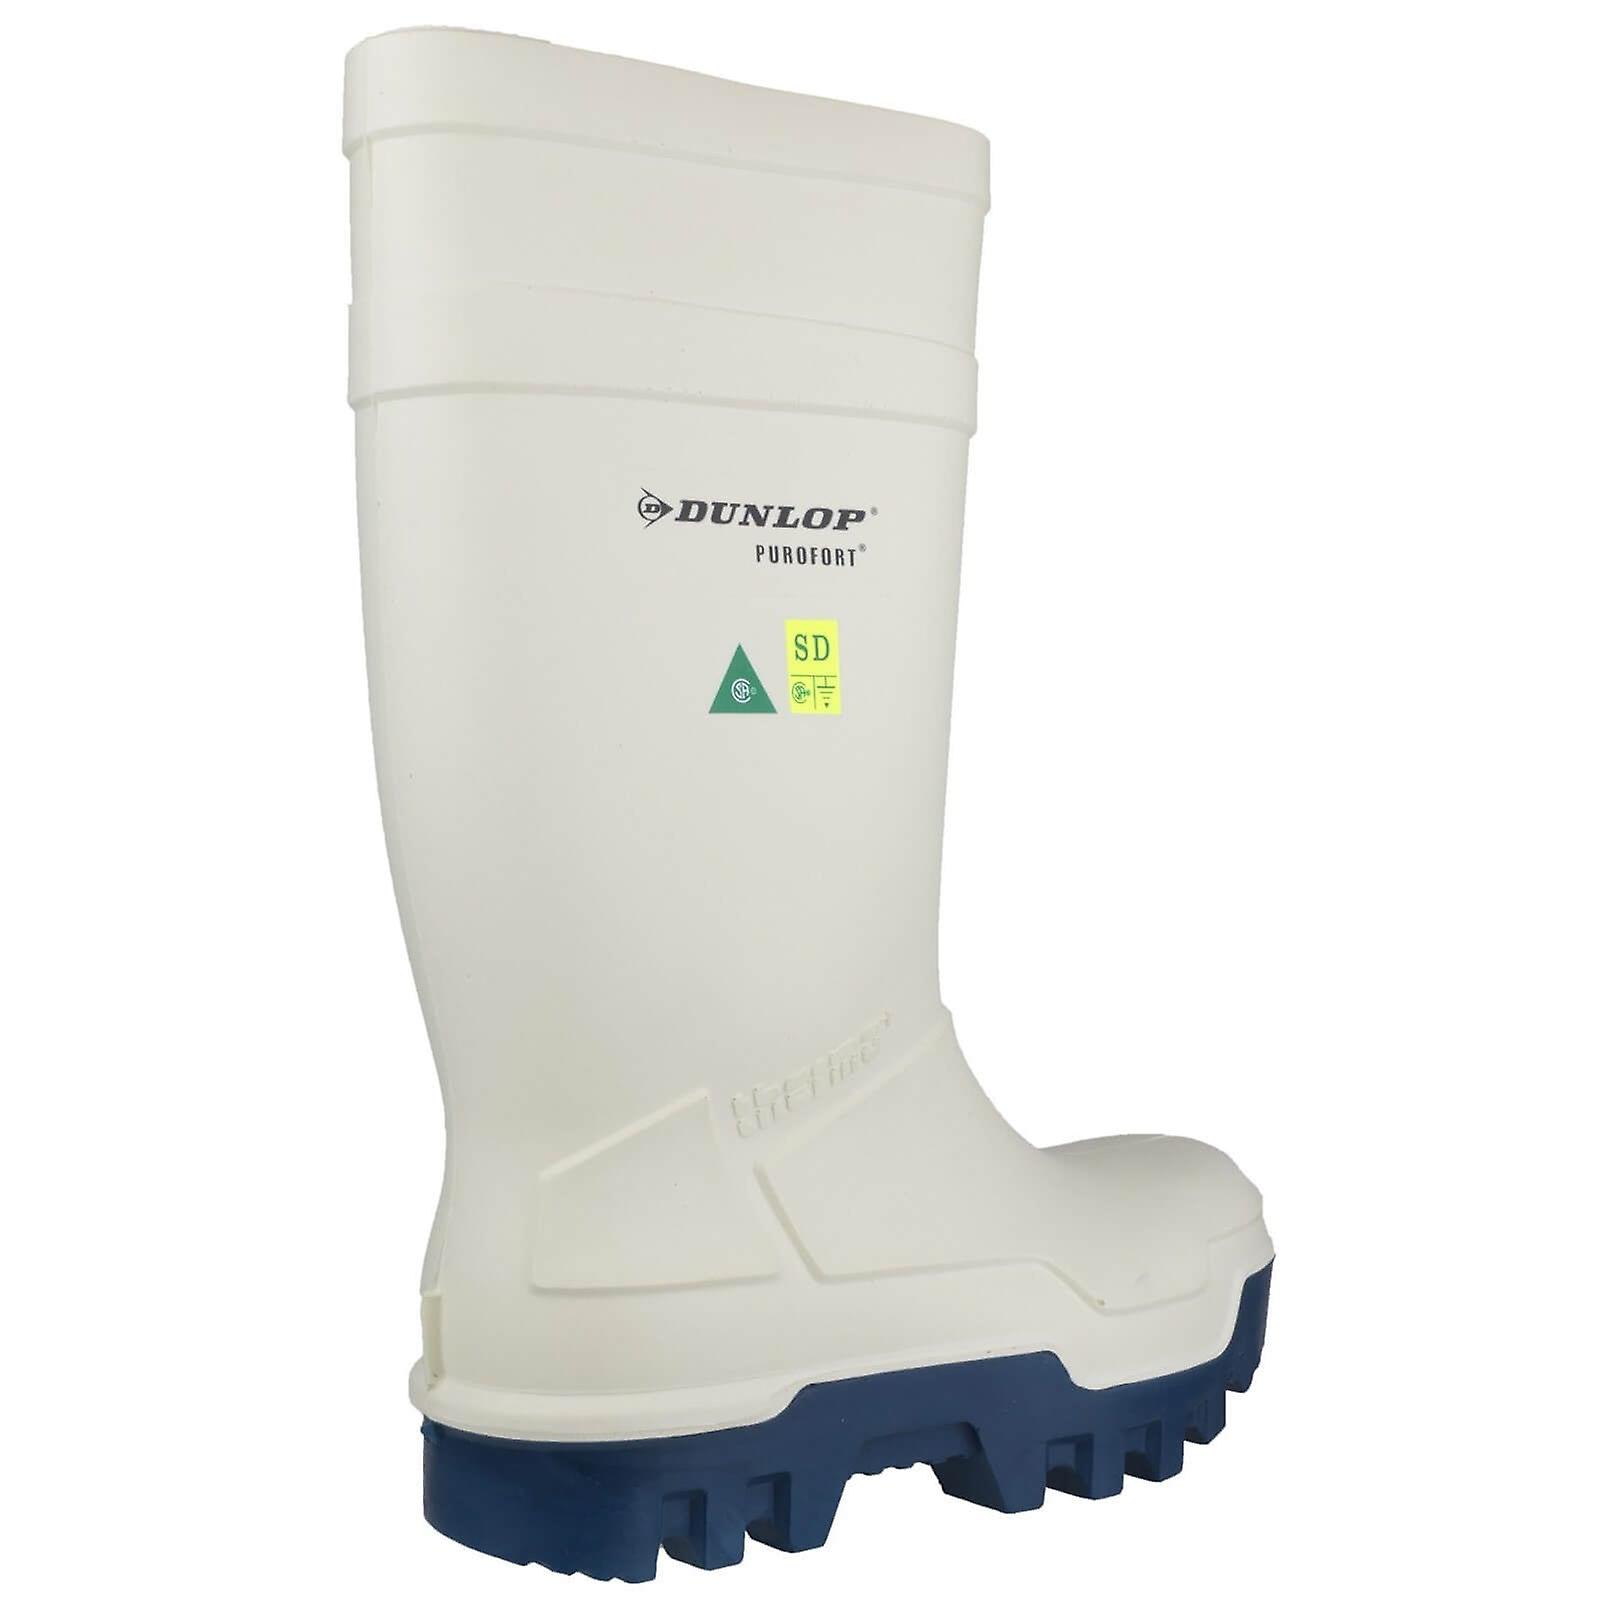 Dunlop purofort thermo+ e662143 full safety wellington boots